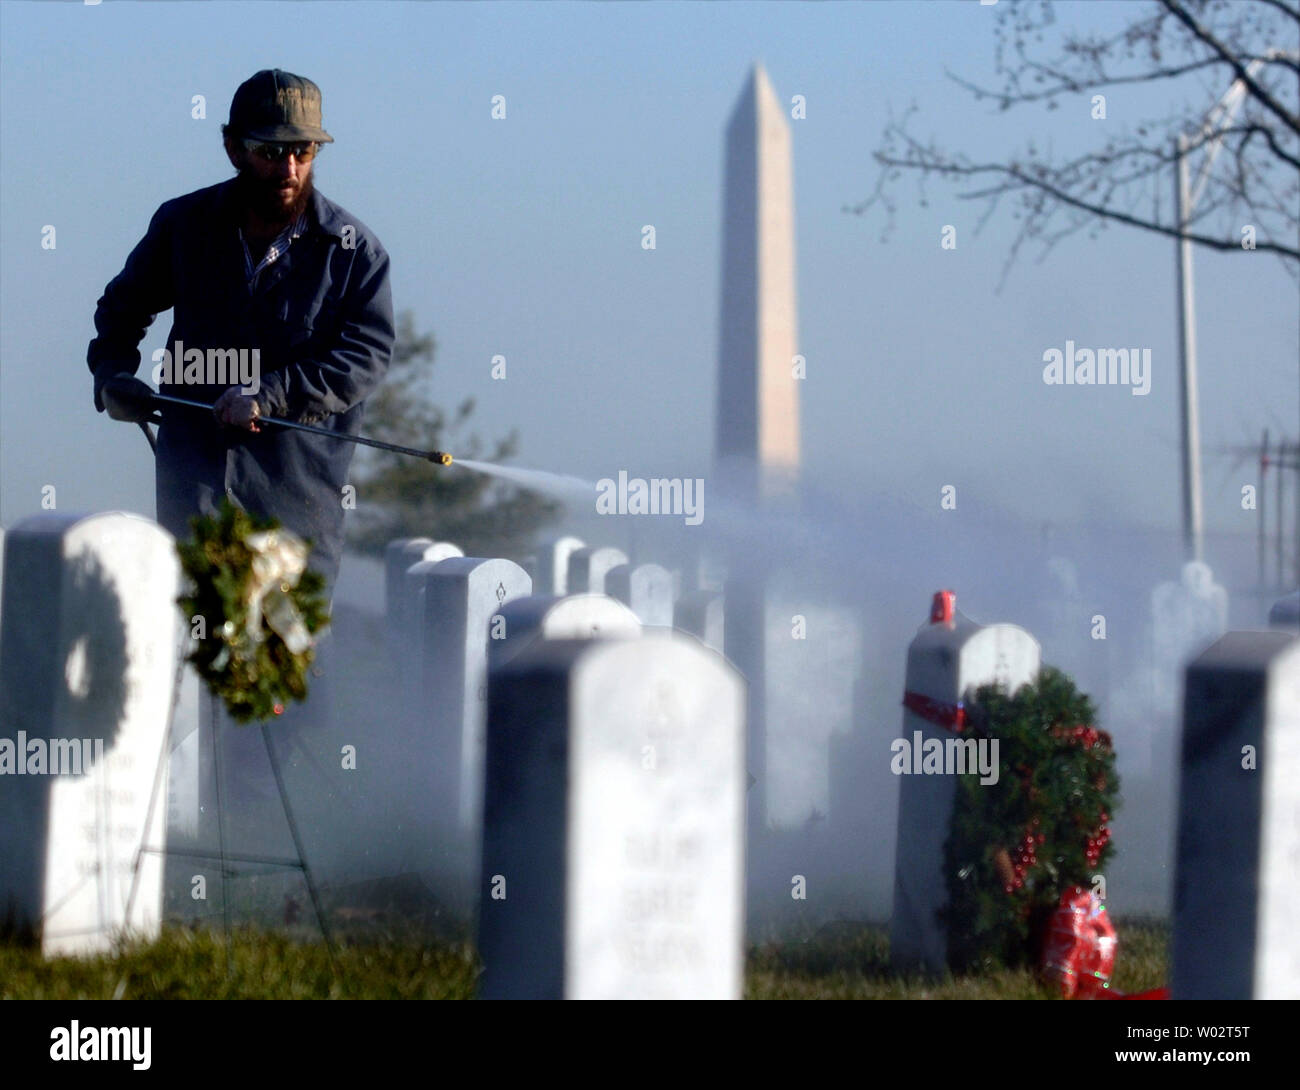 A maintenance worker cleans headstones at Arlington National Cemetery, in Arlington, Virginia on December 20, 2006.  Since 1864, when the first coffin was interred, more than 200,000 burials have taken place in the more than 600 acres of land devoted to America's honored dead.   (UPI Photo/Kevin Dietsch) Stock Photo